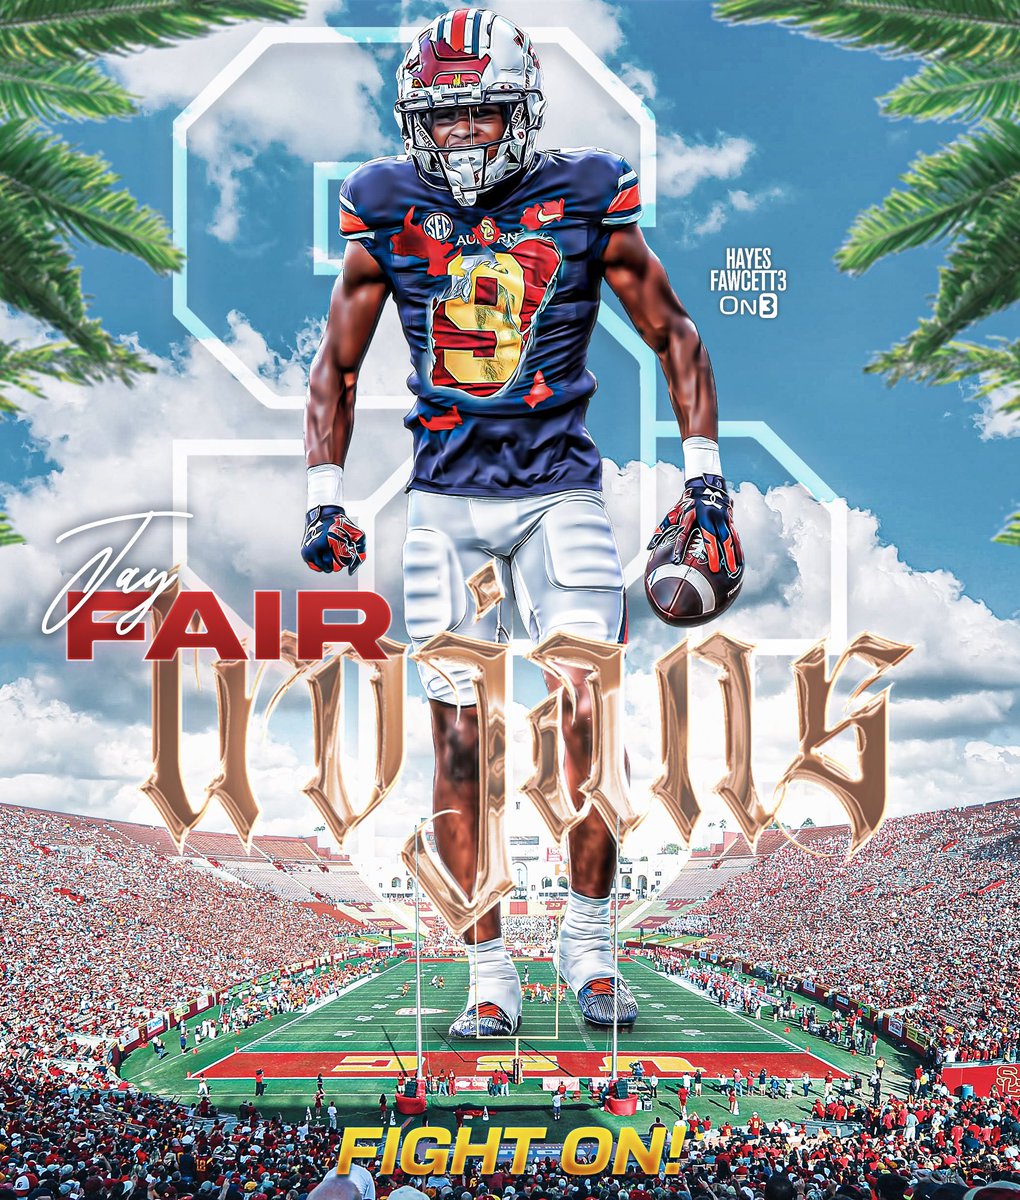 BREAKING: Former Auburn WR Jay Fair has Committed to USC, he tells @on3sports The 5’11 186 WR was a 2 year starter for the Tigers Was 2nd on the team in yards & receptions, & averaged 11 yards per catch in 2023 Will have 2 years of eligibility remaining…